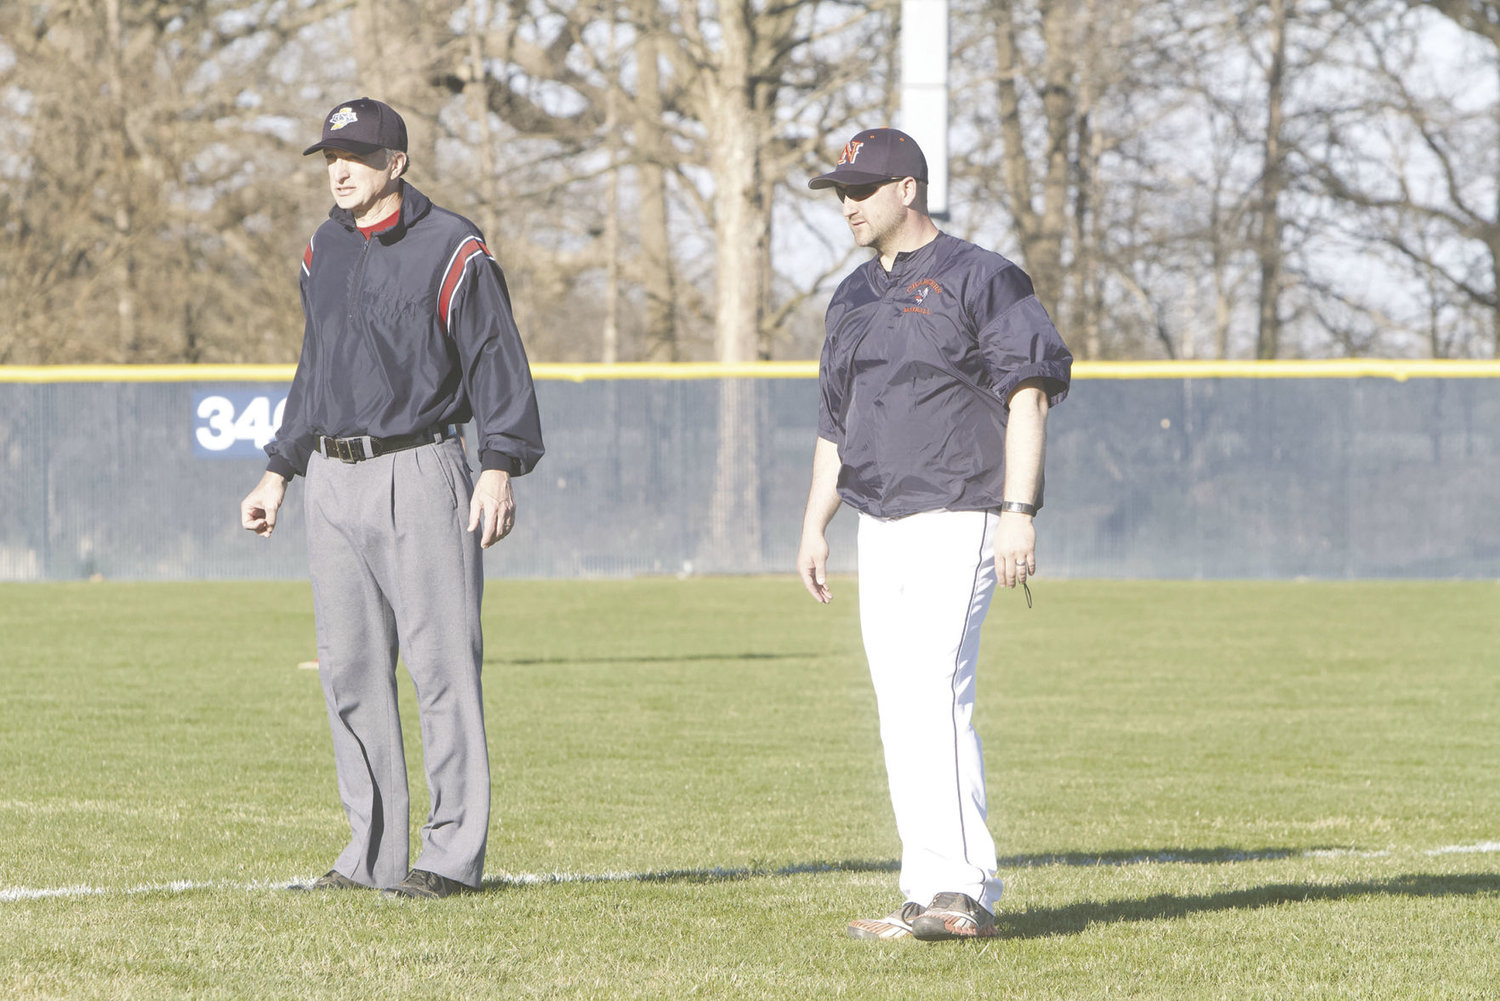 Ryan Nuppnau takes over the North Montgomery baseball program from Matt Merica. After focusing on his head coaching duties for girls basketball the last handful of years, Nuppnau returned to the diamond this past spring as a varsity assistant for the Chargers.